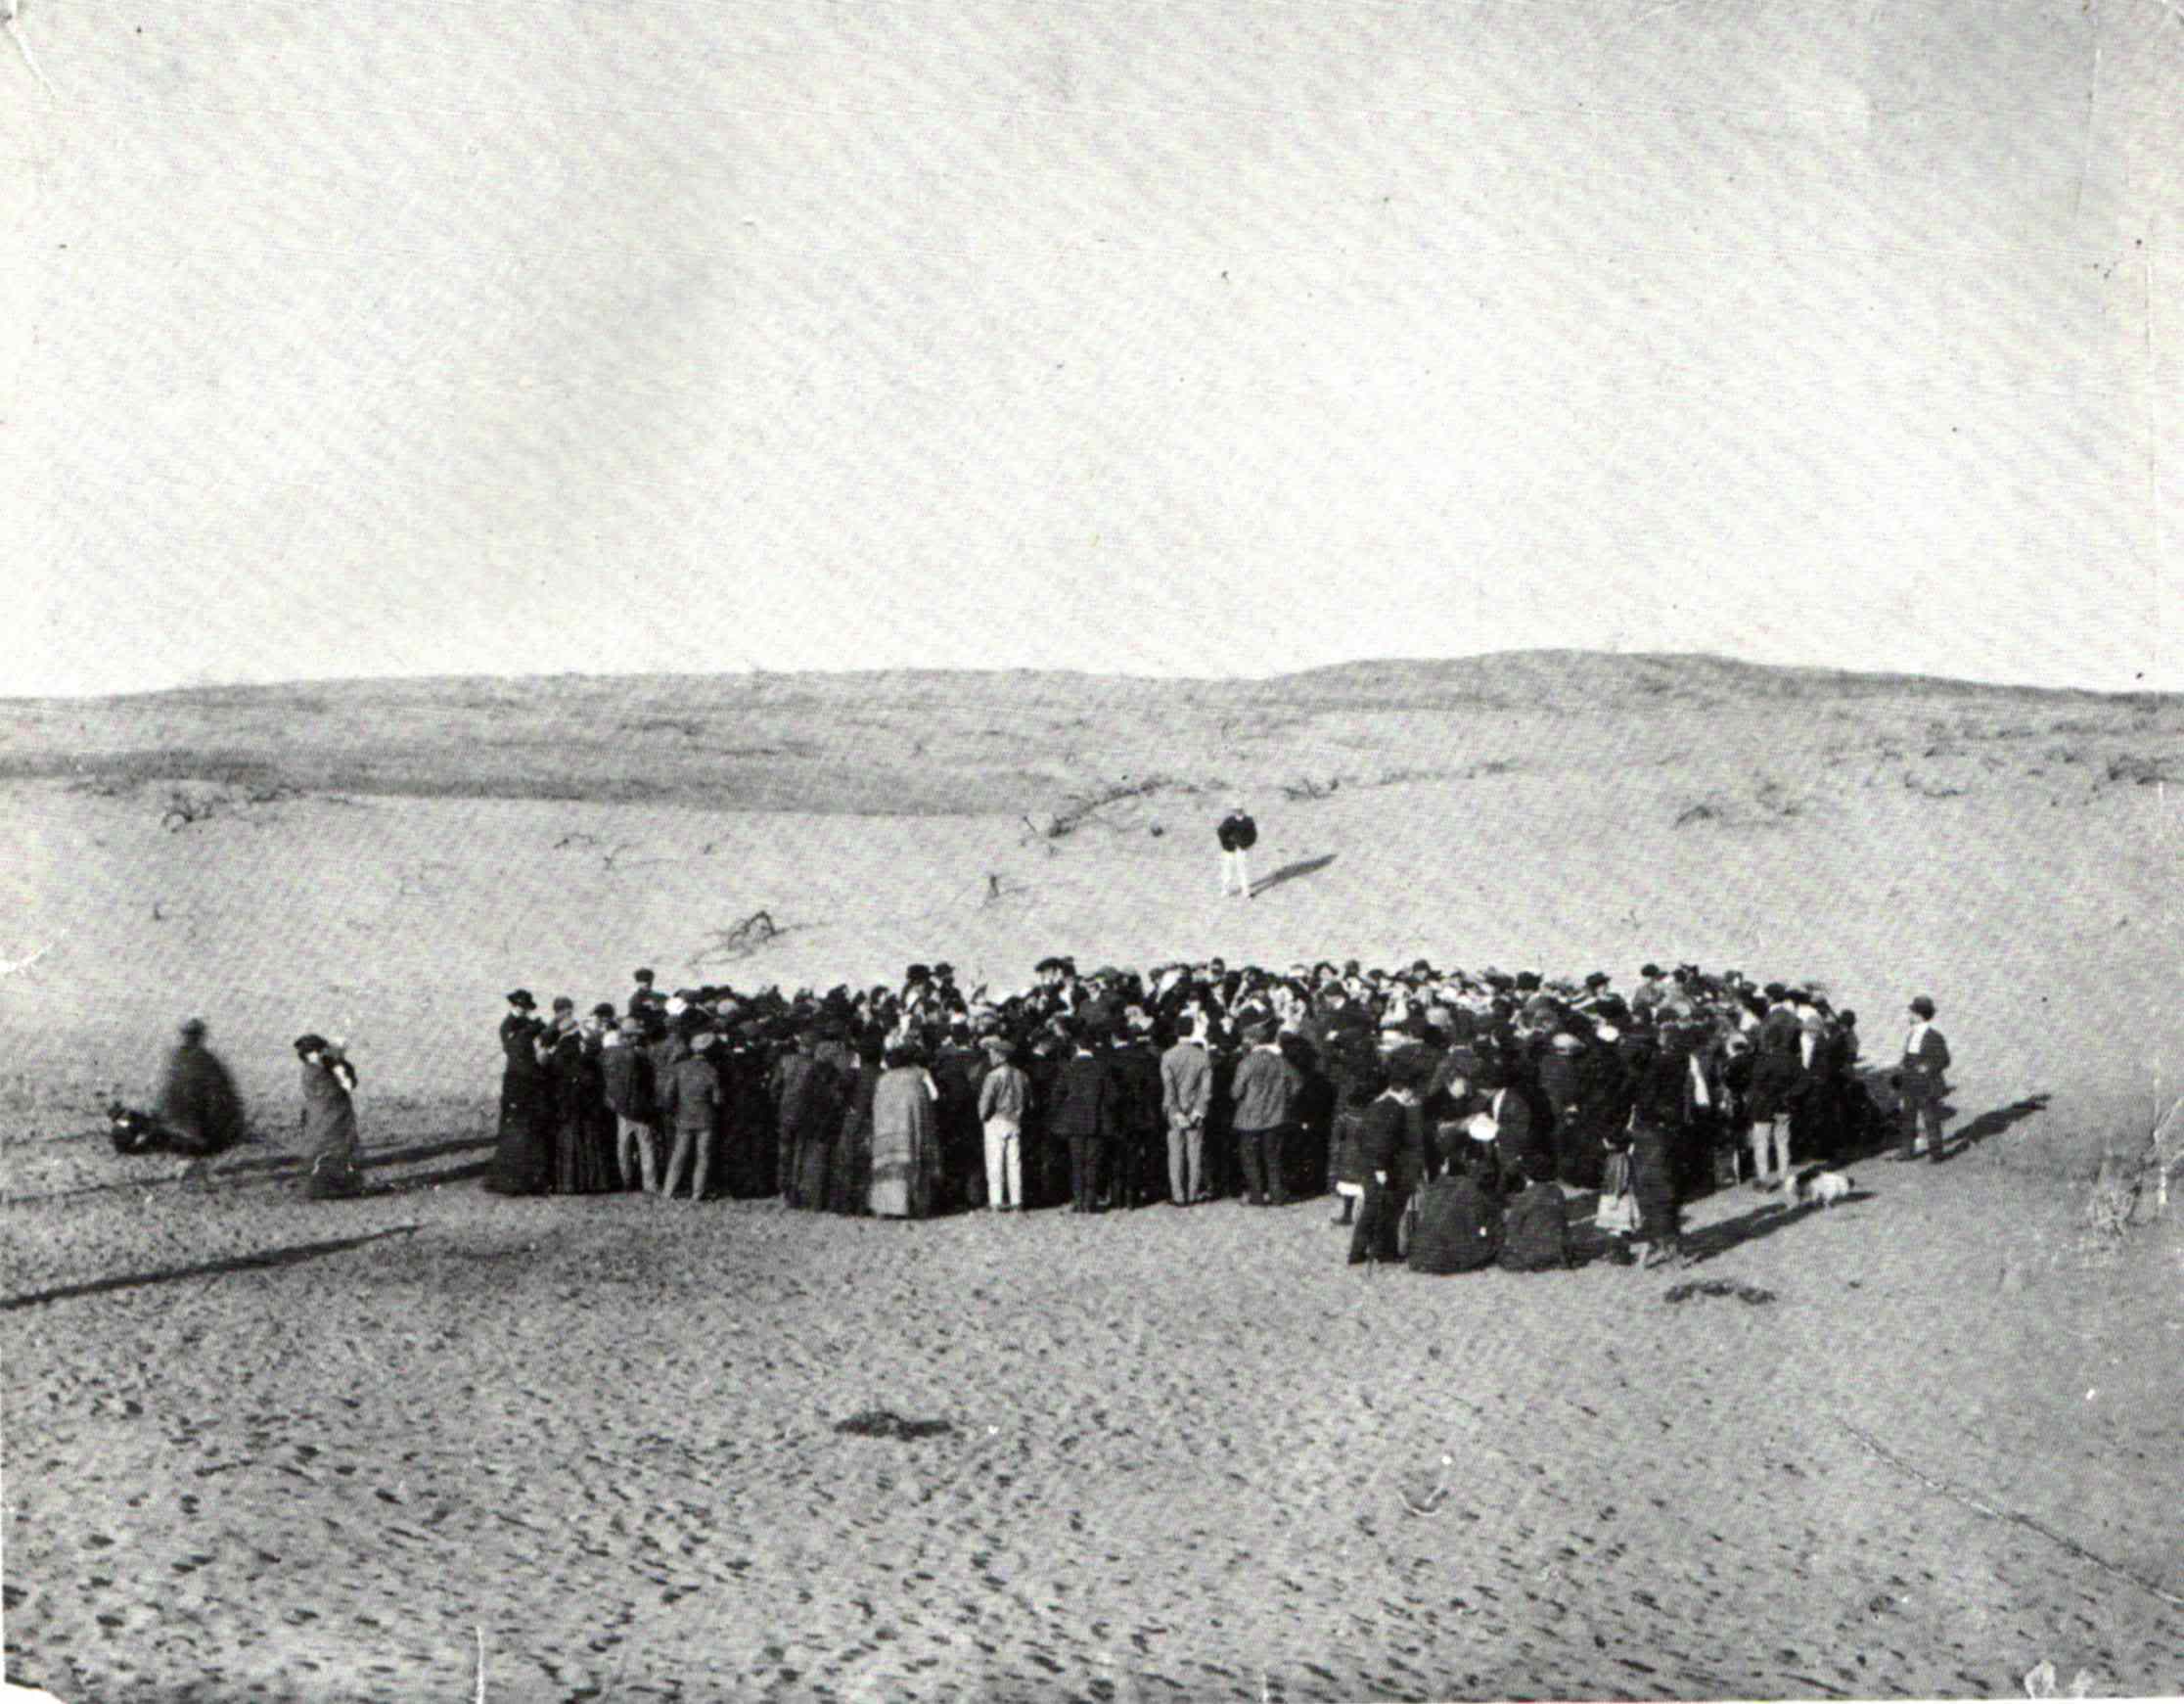 April 11th, 1909-About 100 people participate in a lottery to equally divide a 12-acre plot of sand dunes they've purchased, that would later become the city of Tel Aviv, Israel